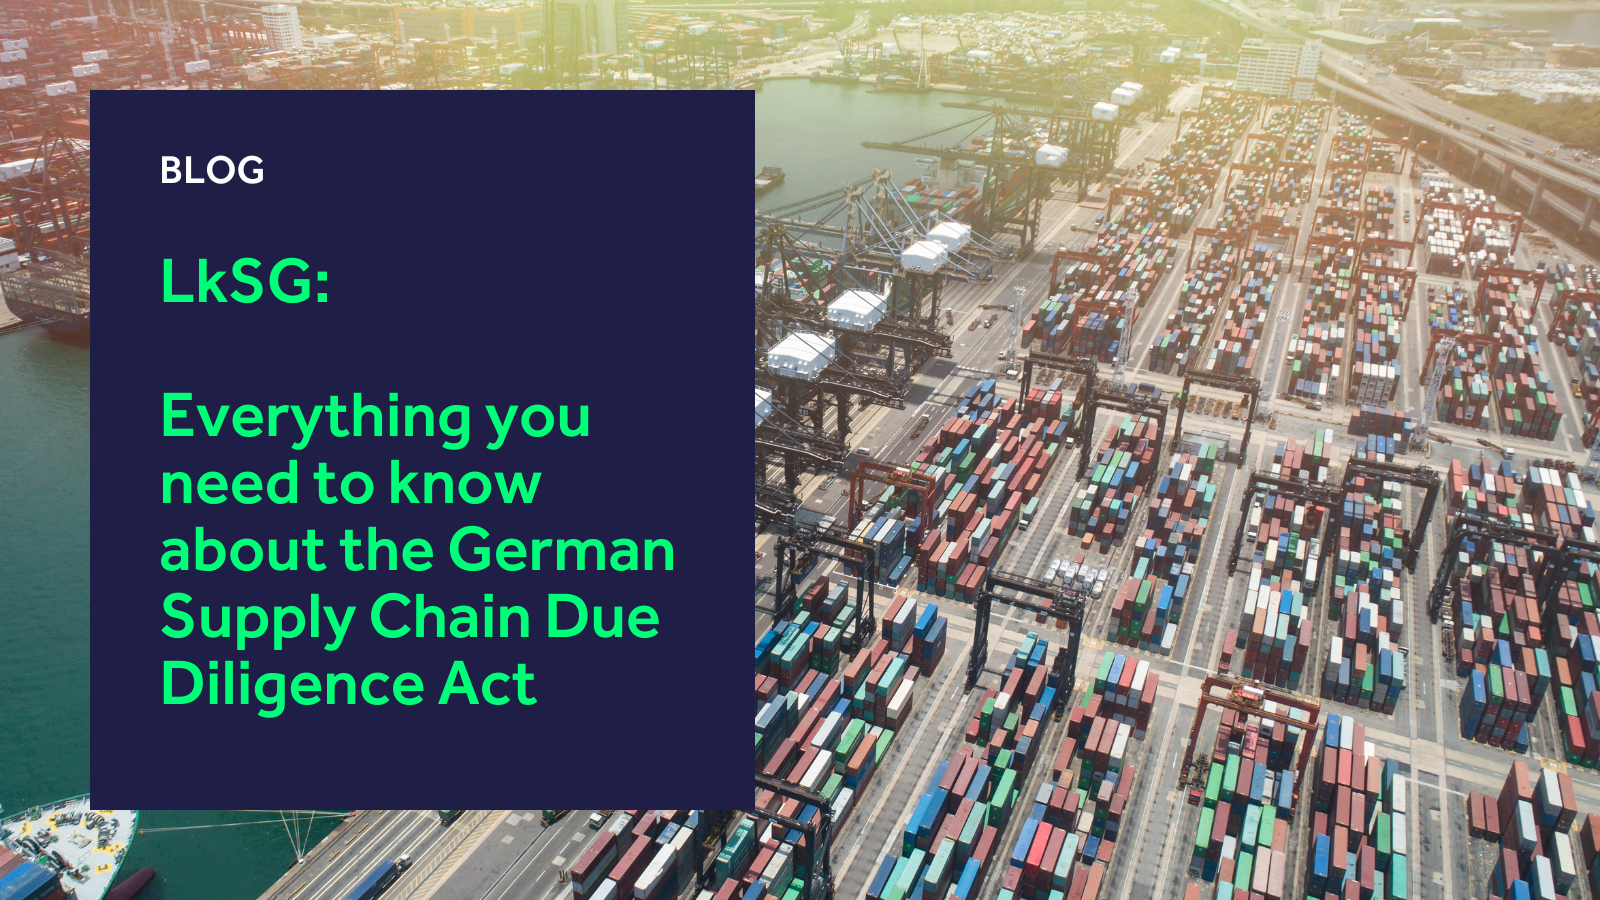 Everything you need to know about the German Supply Chain Due Diligence Act blog header